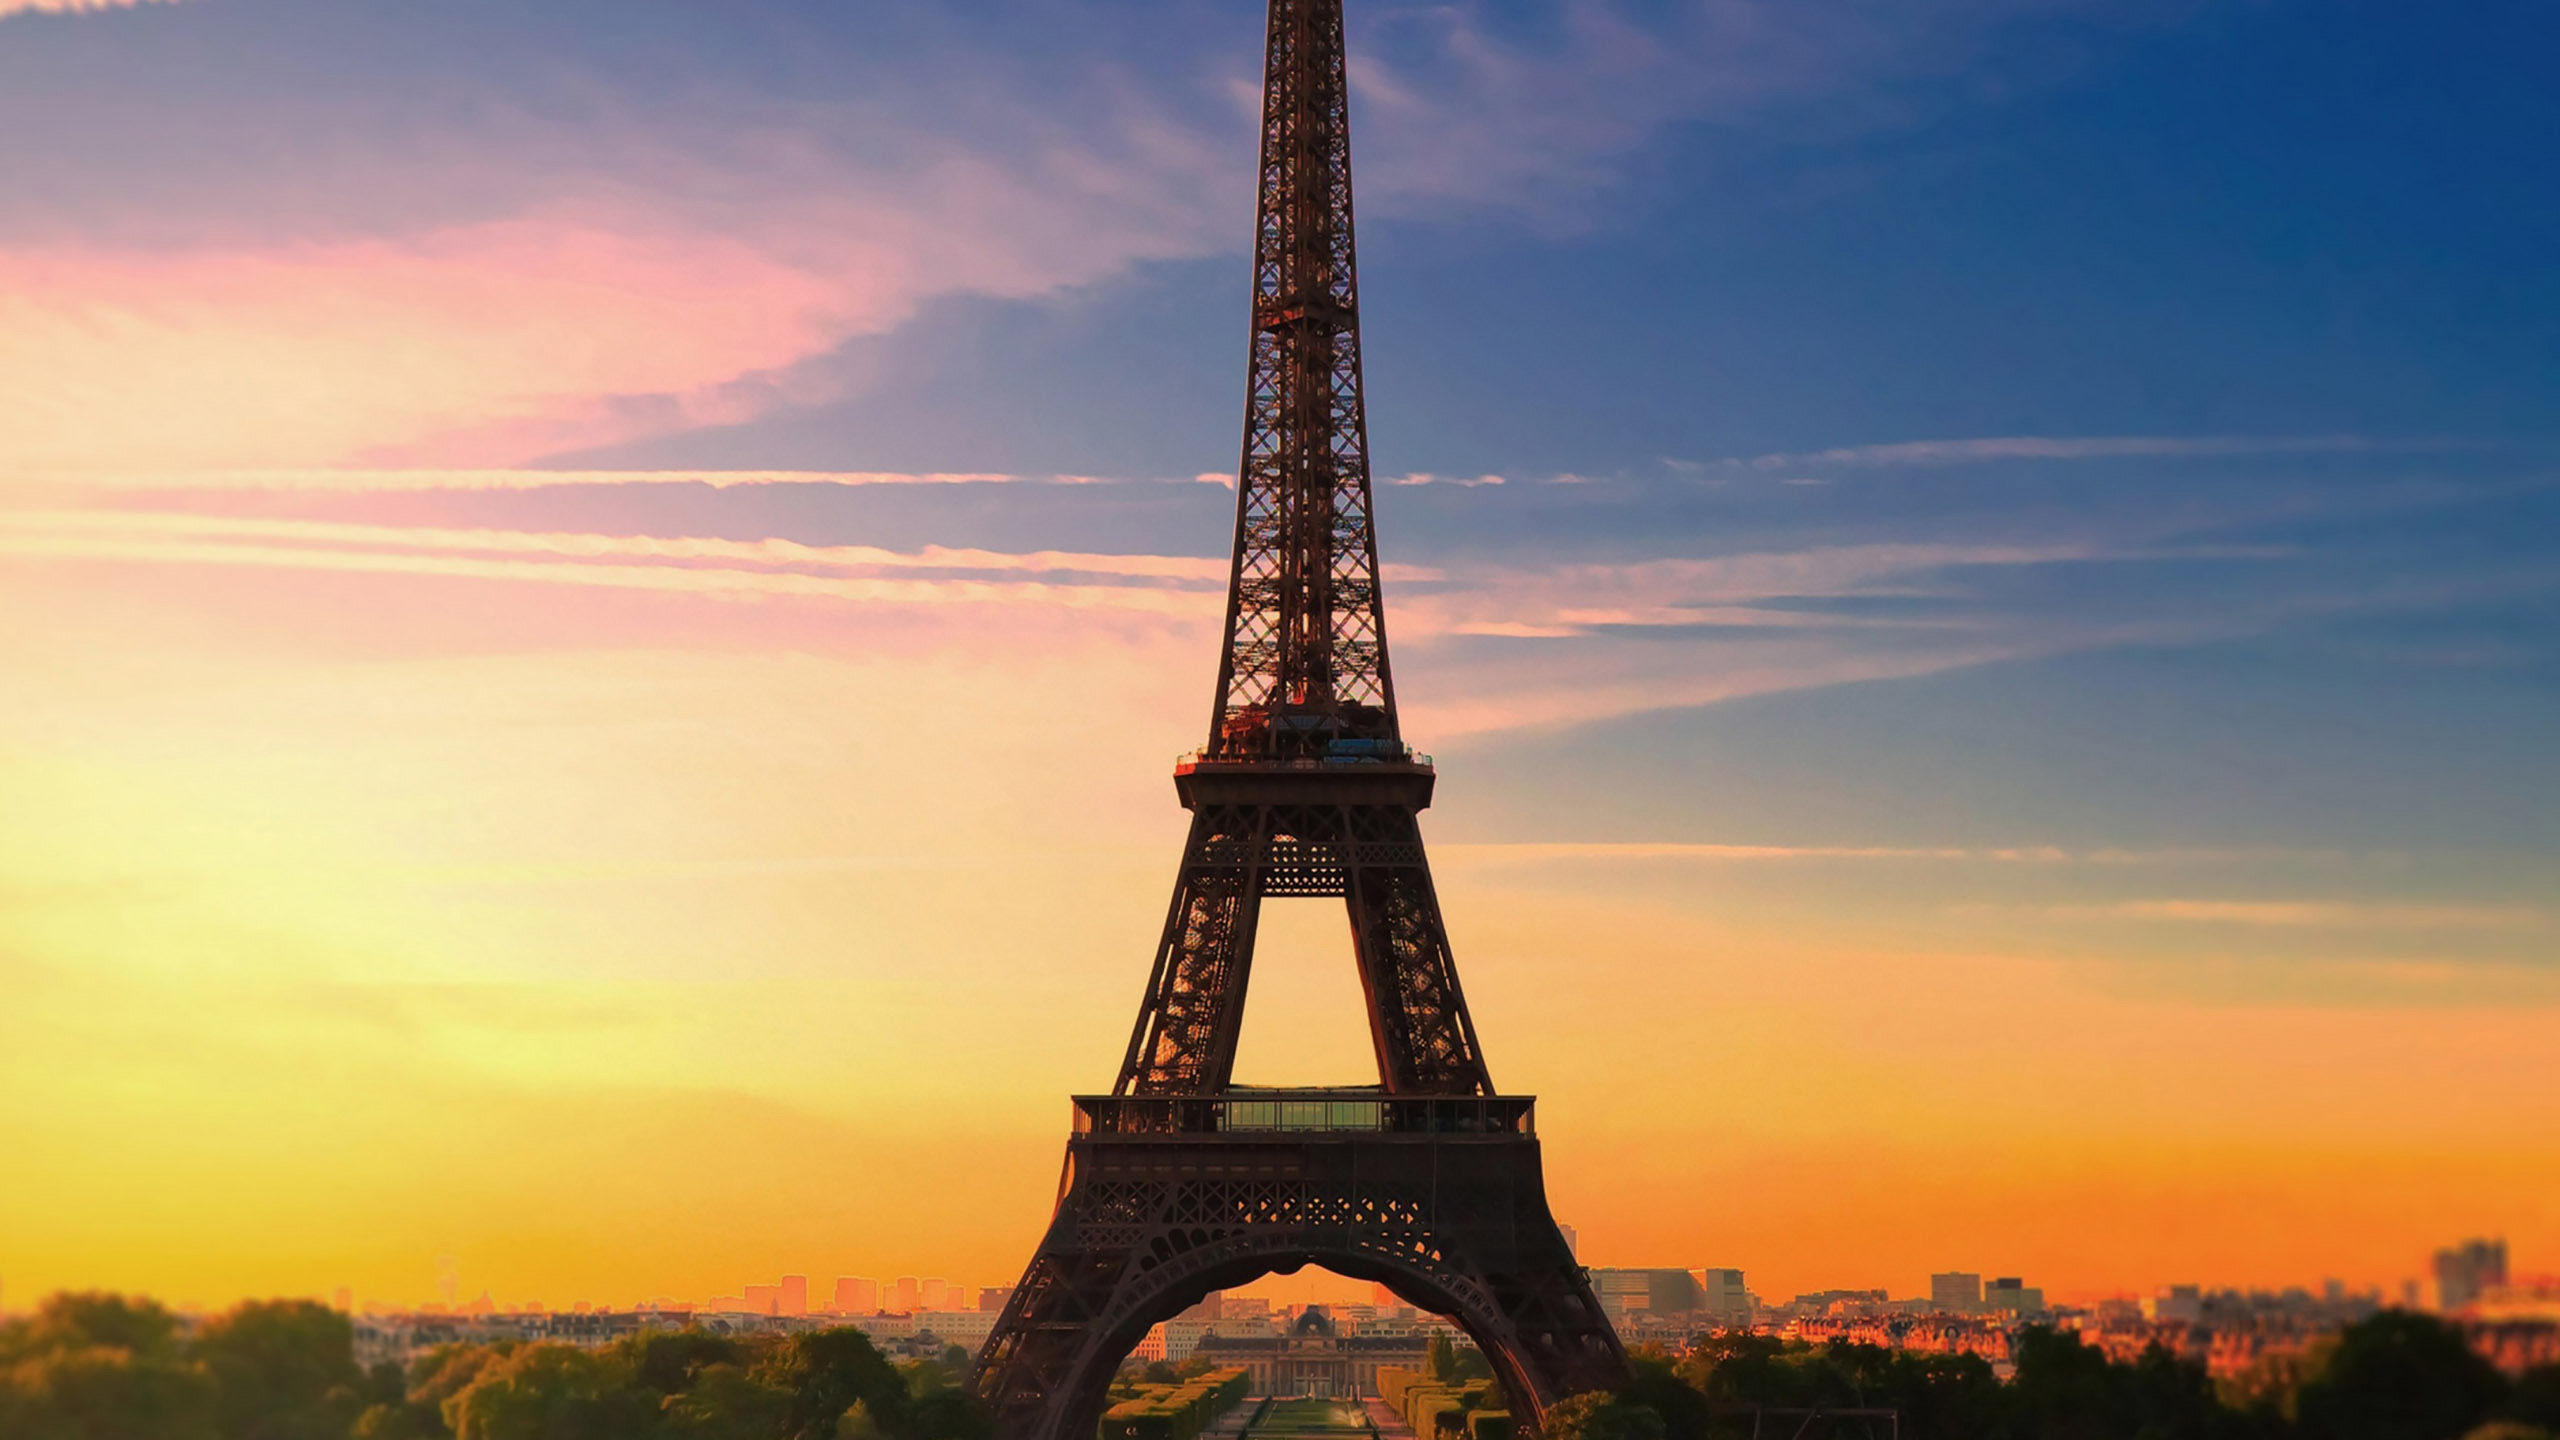 Eiffel Tower Stock Image Very Cool Wallpapers HD Wallpapers Backgrounds Images